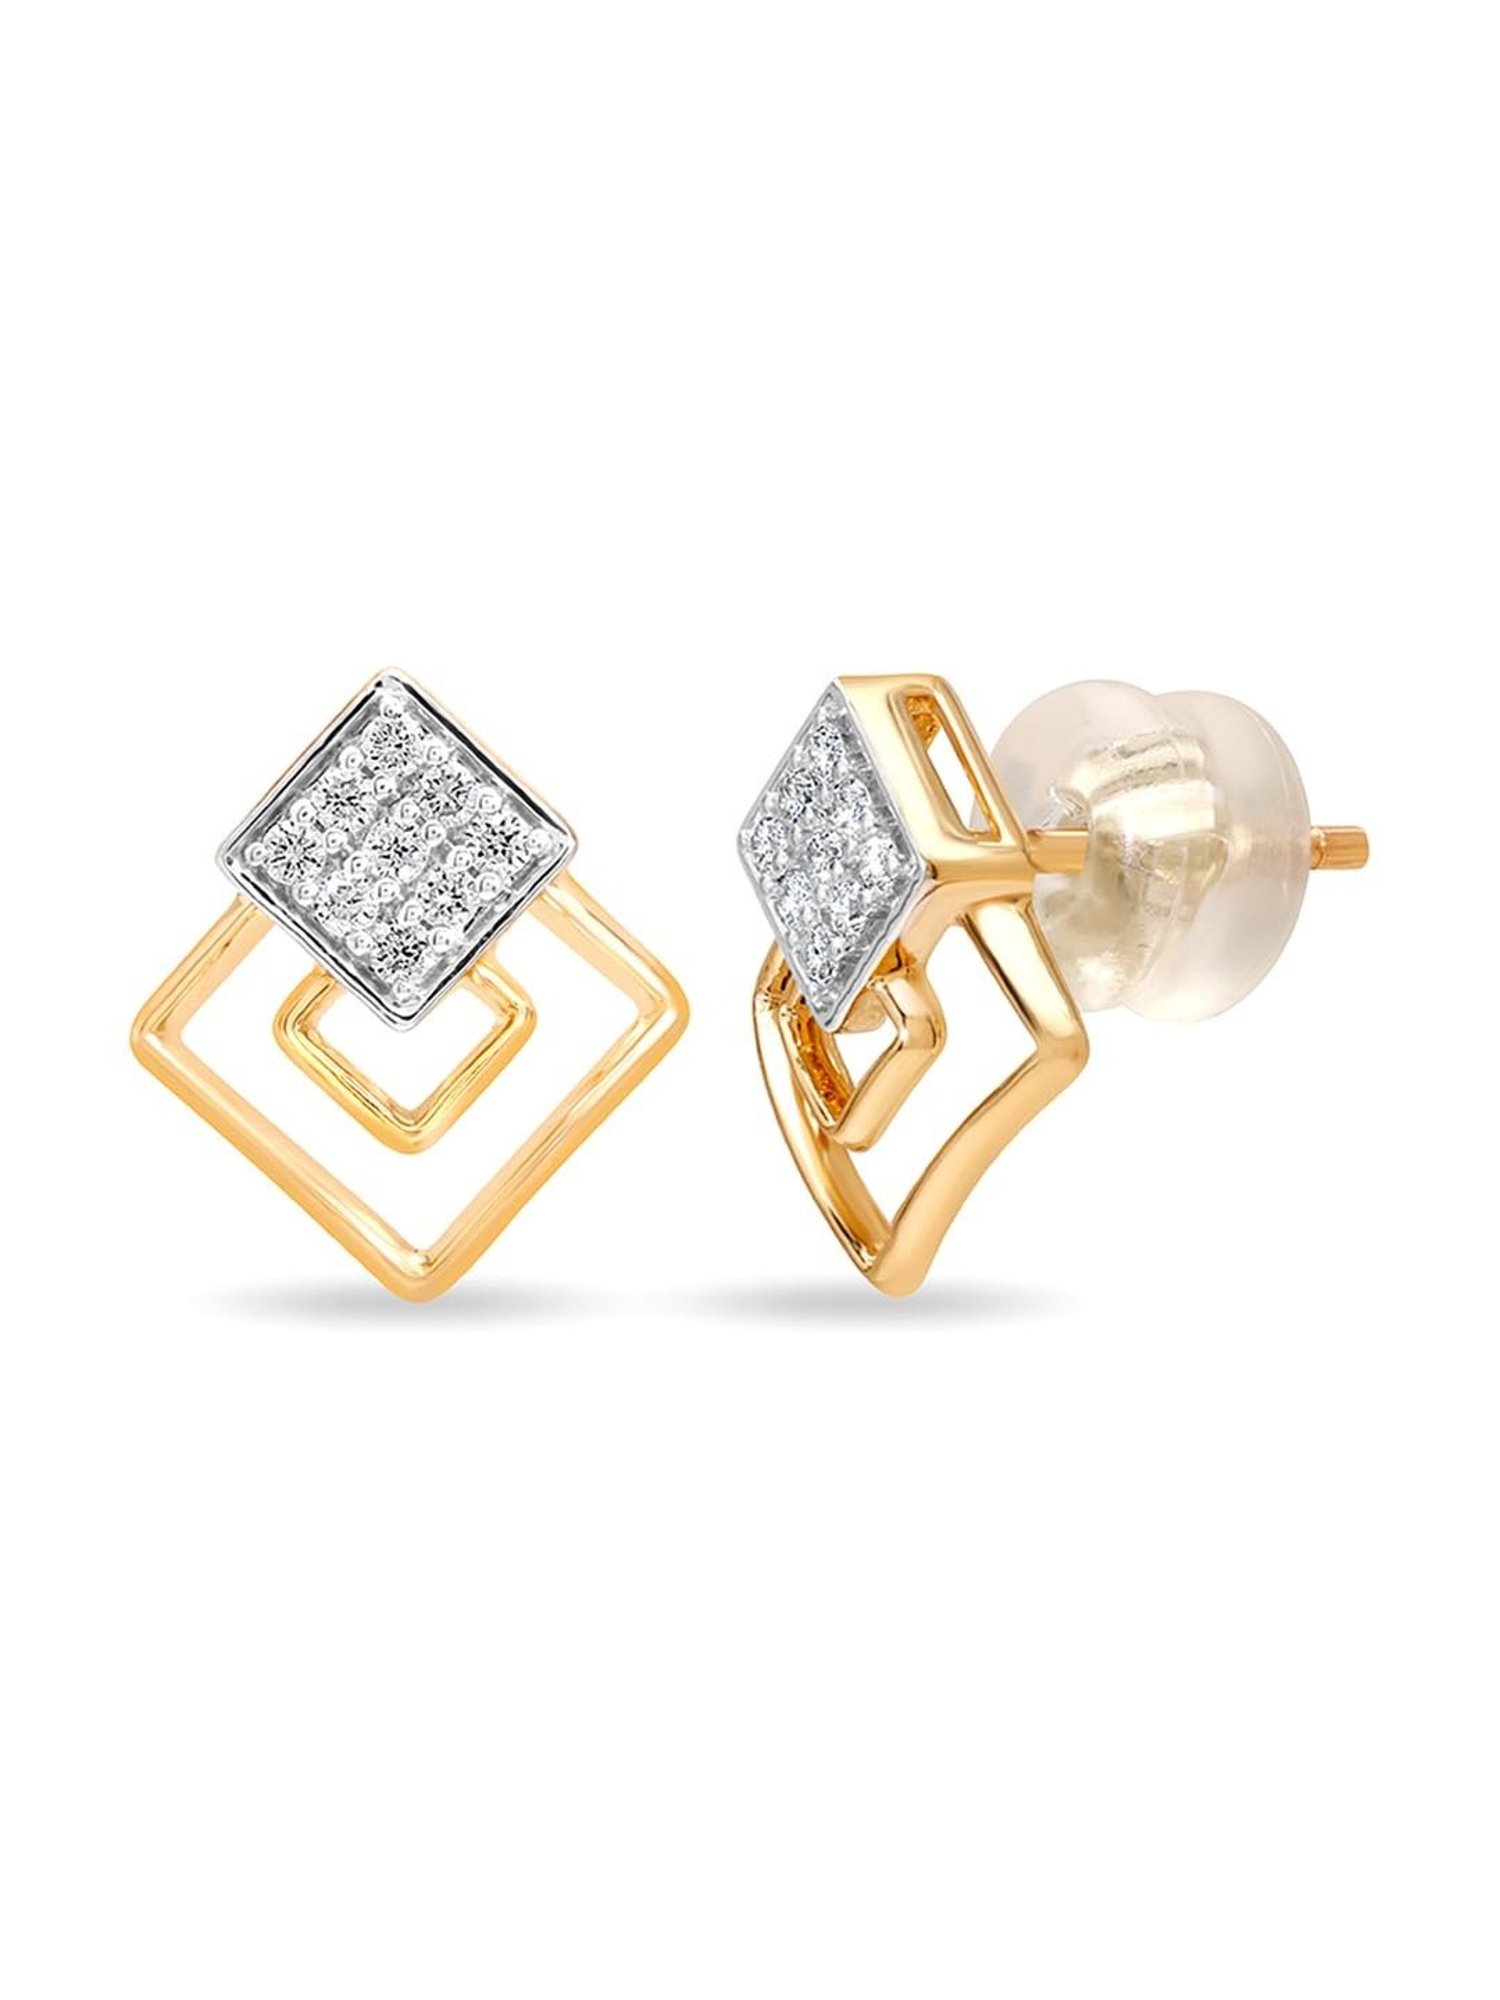 Sparkling Avenues | Tanishq Online Store